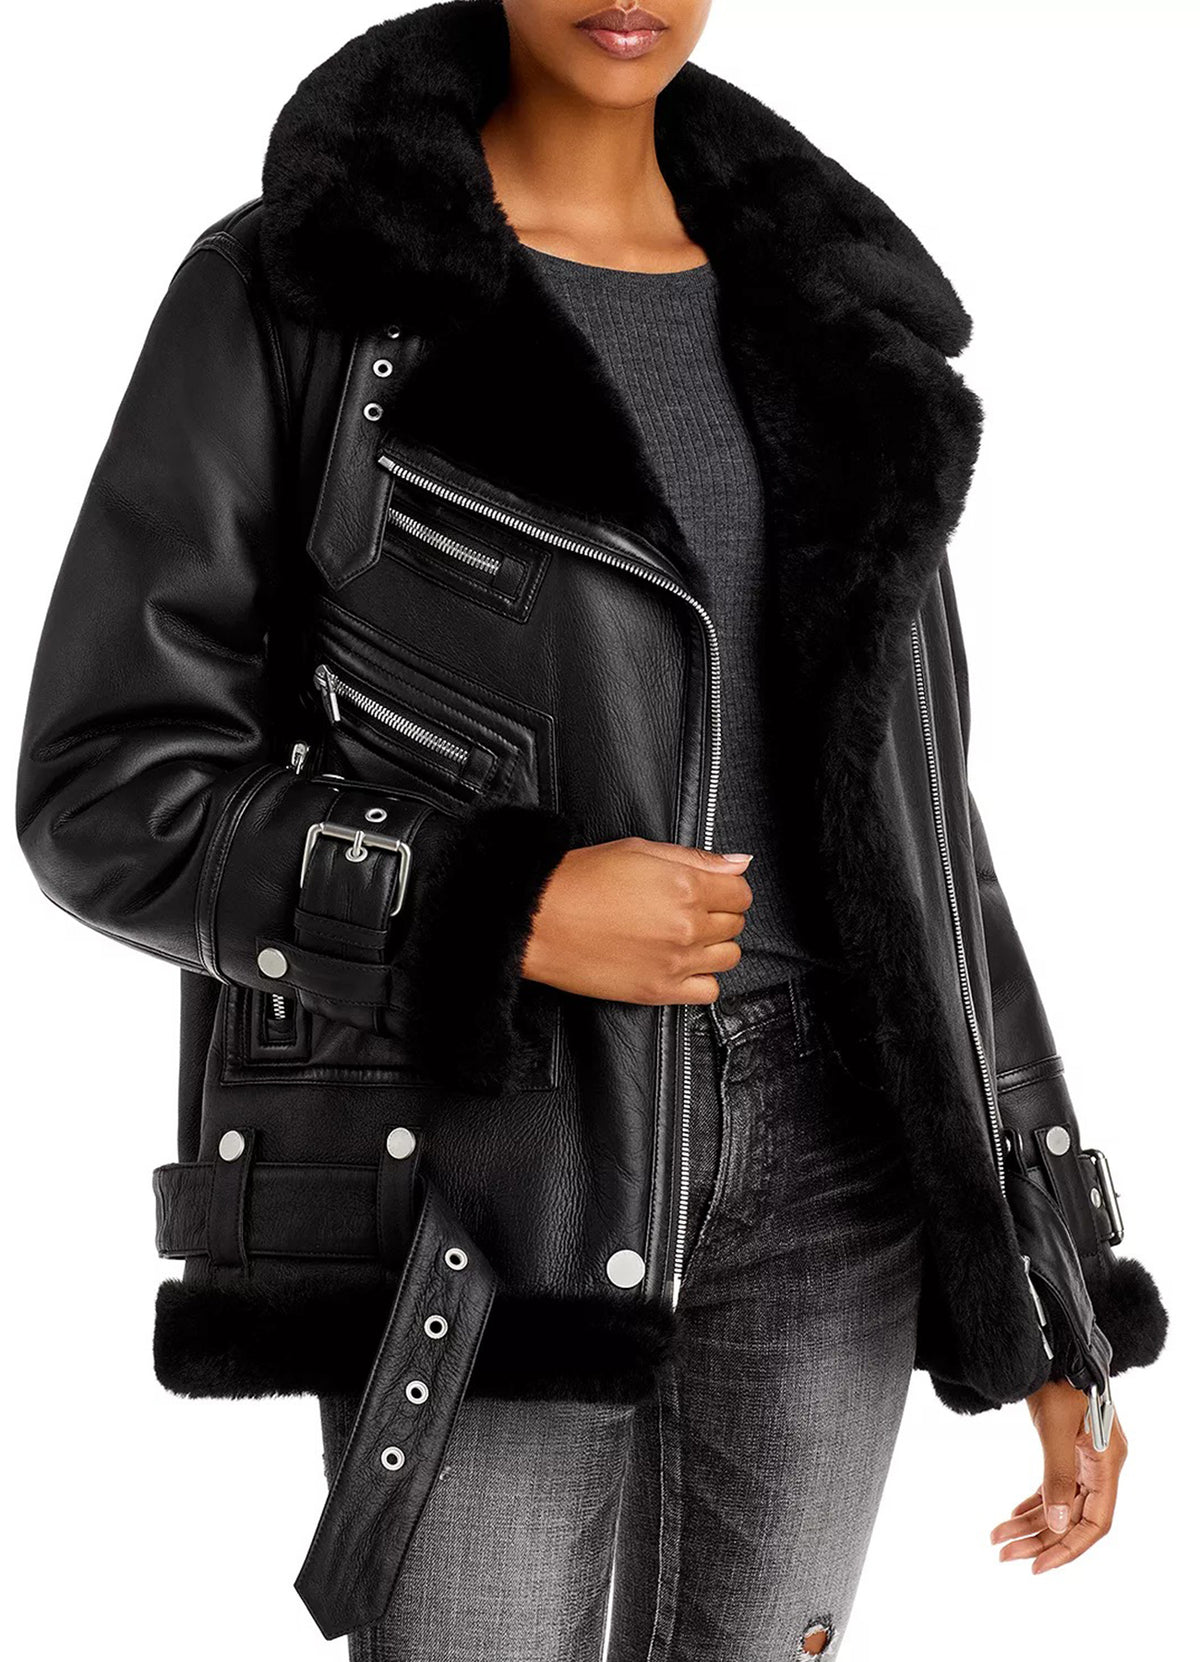 Womens Jet Black Shearling Leather Jacket | Shop Now!